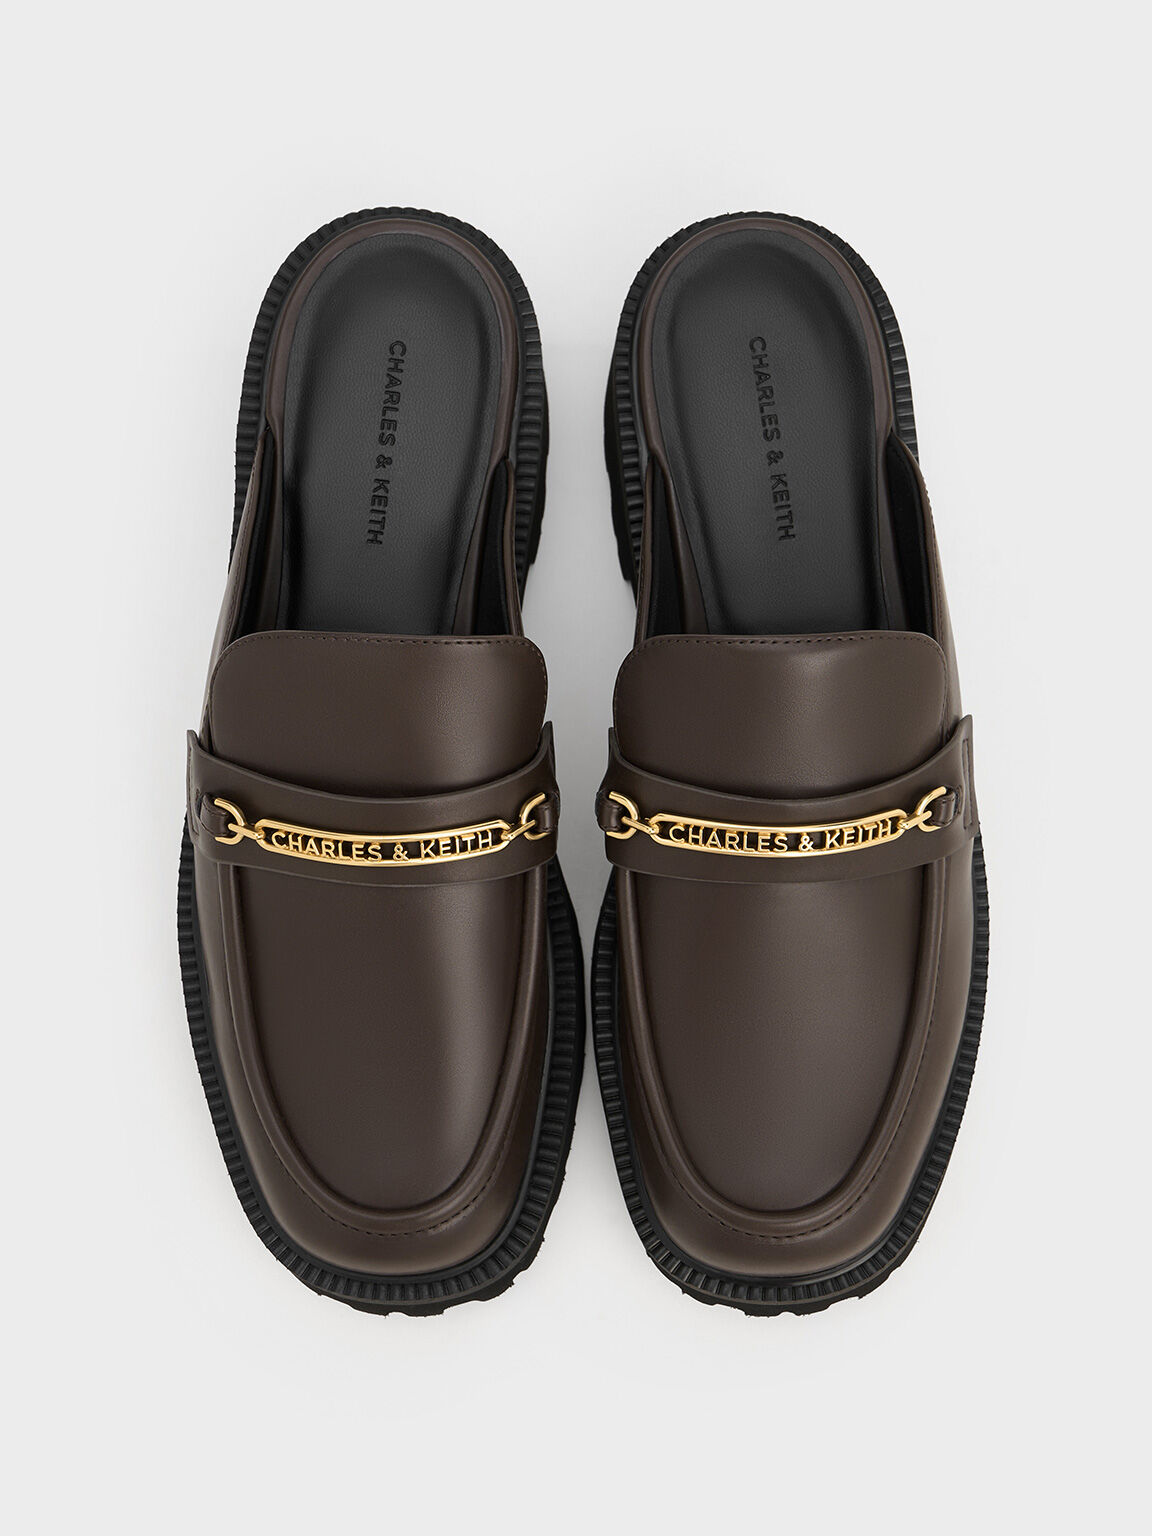 Remy Metallic-Accent Loafer Mules, Brown, hi-res